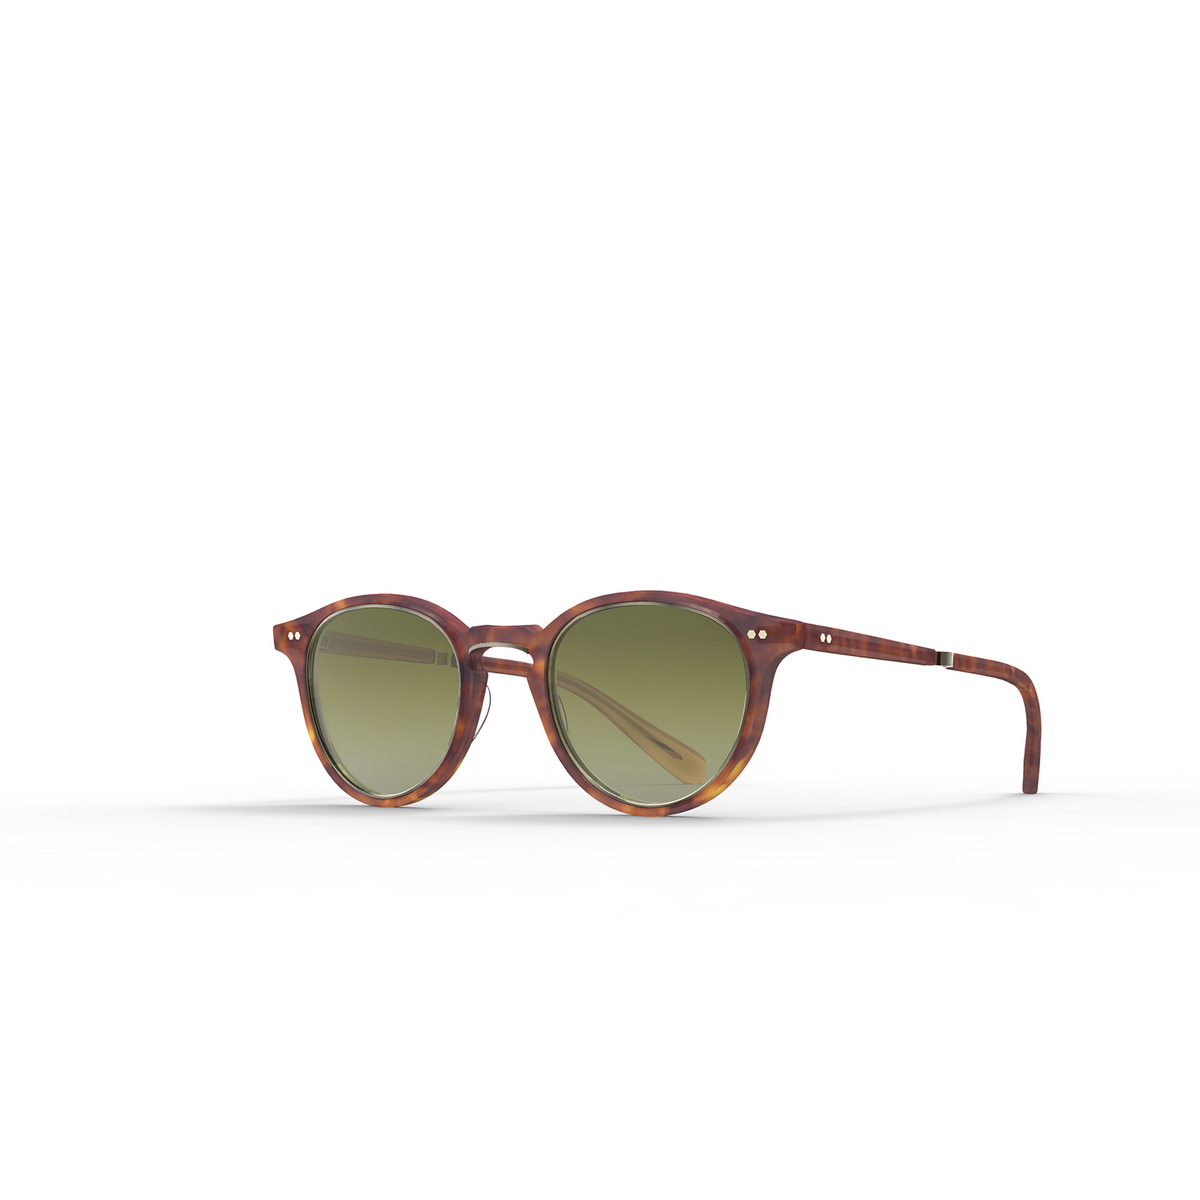 Mr. Leight MARMONT II S Sunglasses CACT-ATG/ELM Cacao Tortoise-Antique Gold - three-quarters view